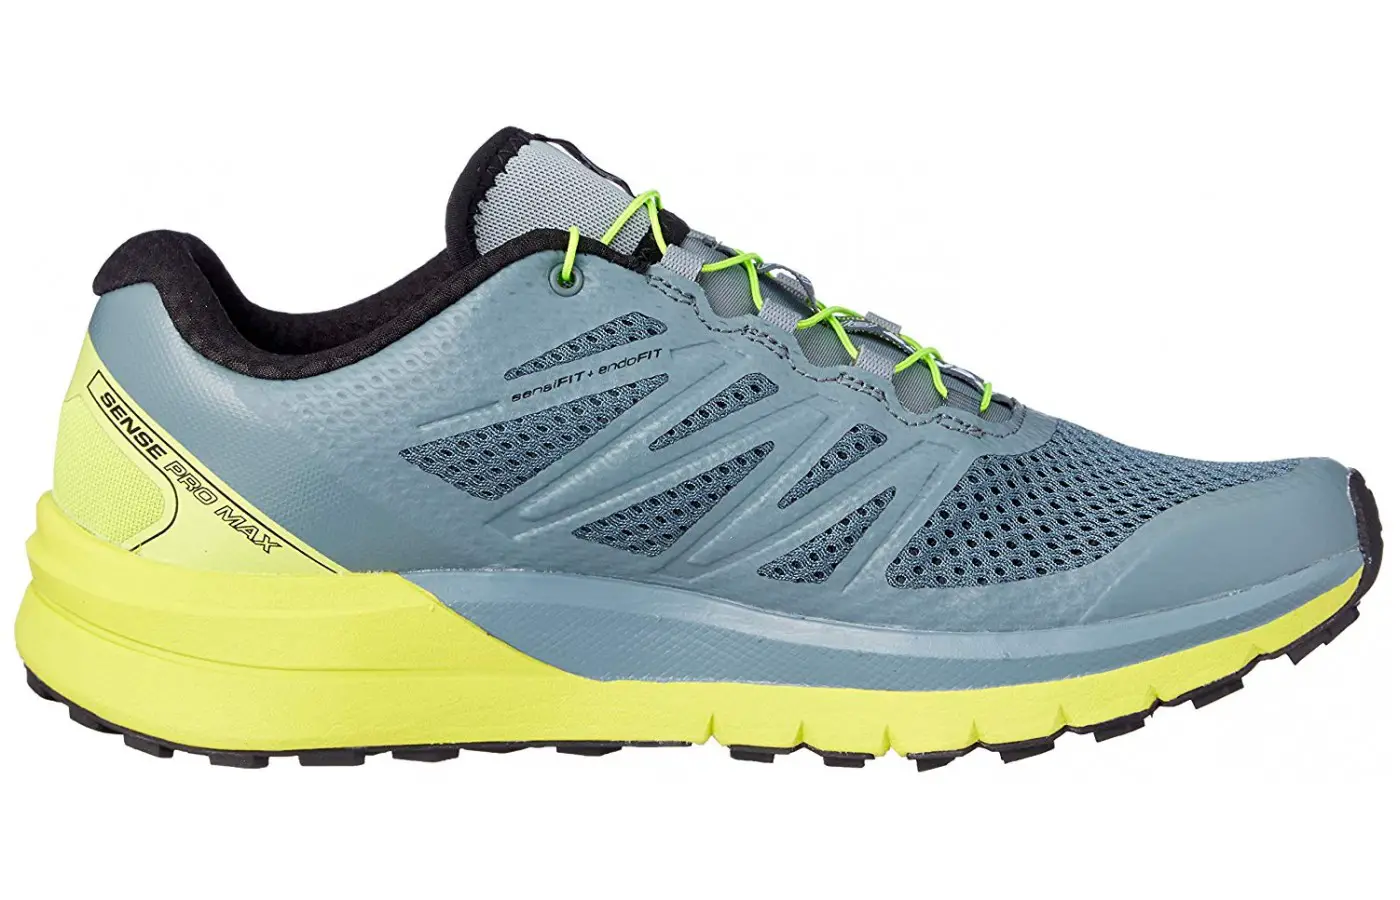 The Salomon Sense Pro Max is made breathable with the mesh construction. 